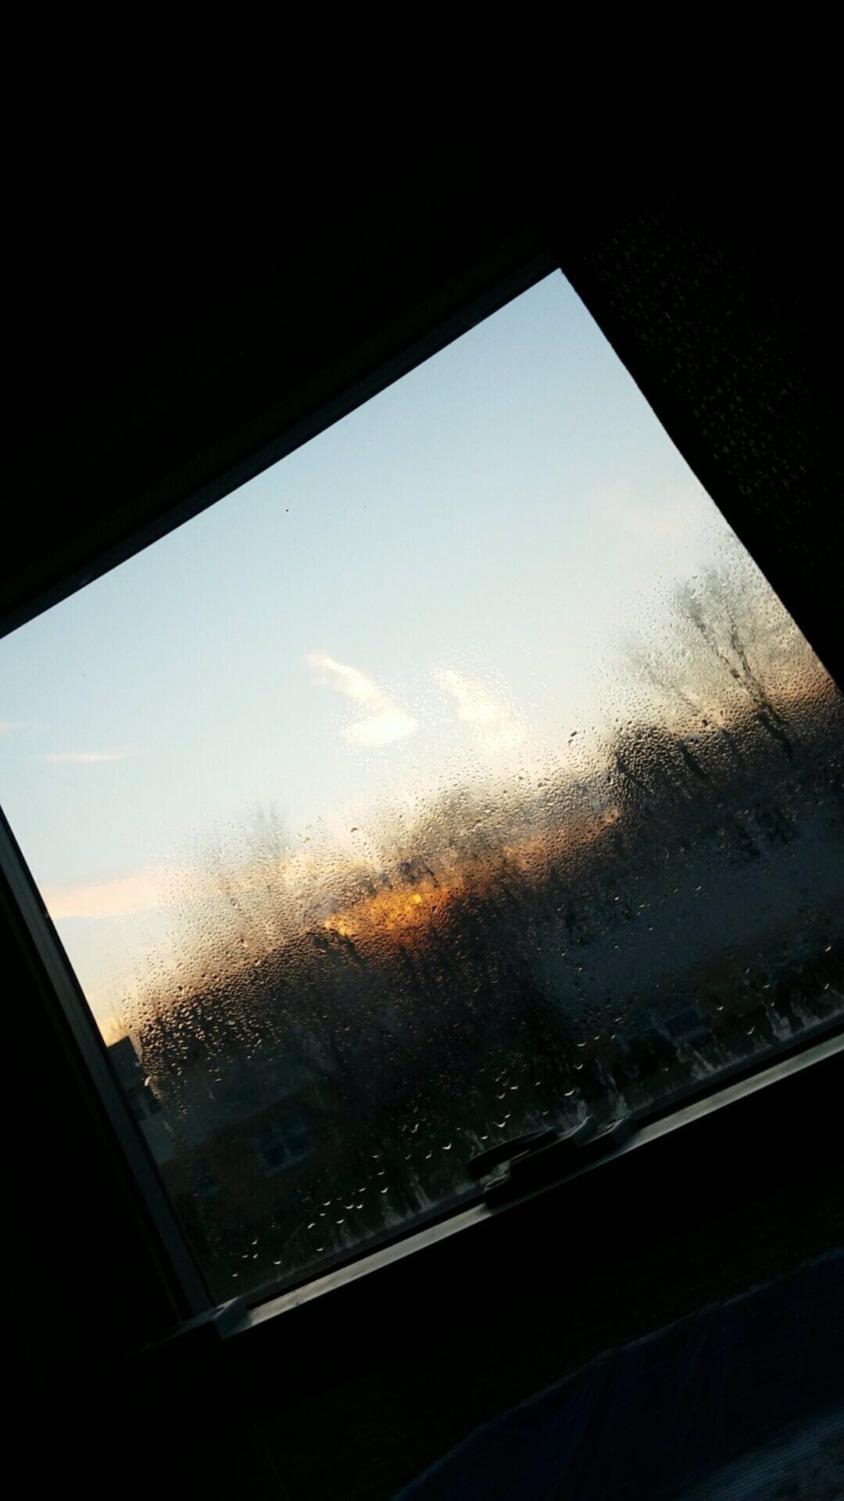 The+school+bus+window+in+the+morning.